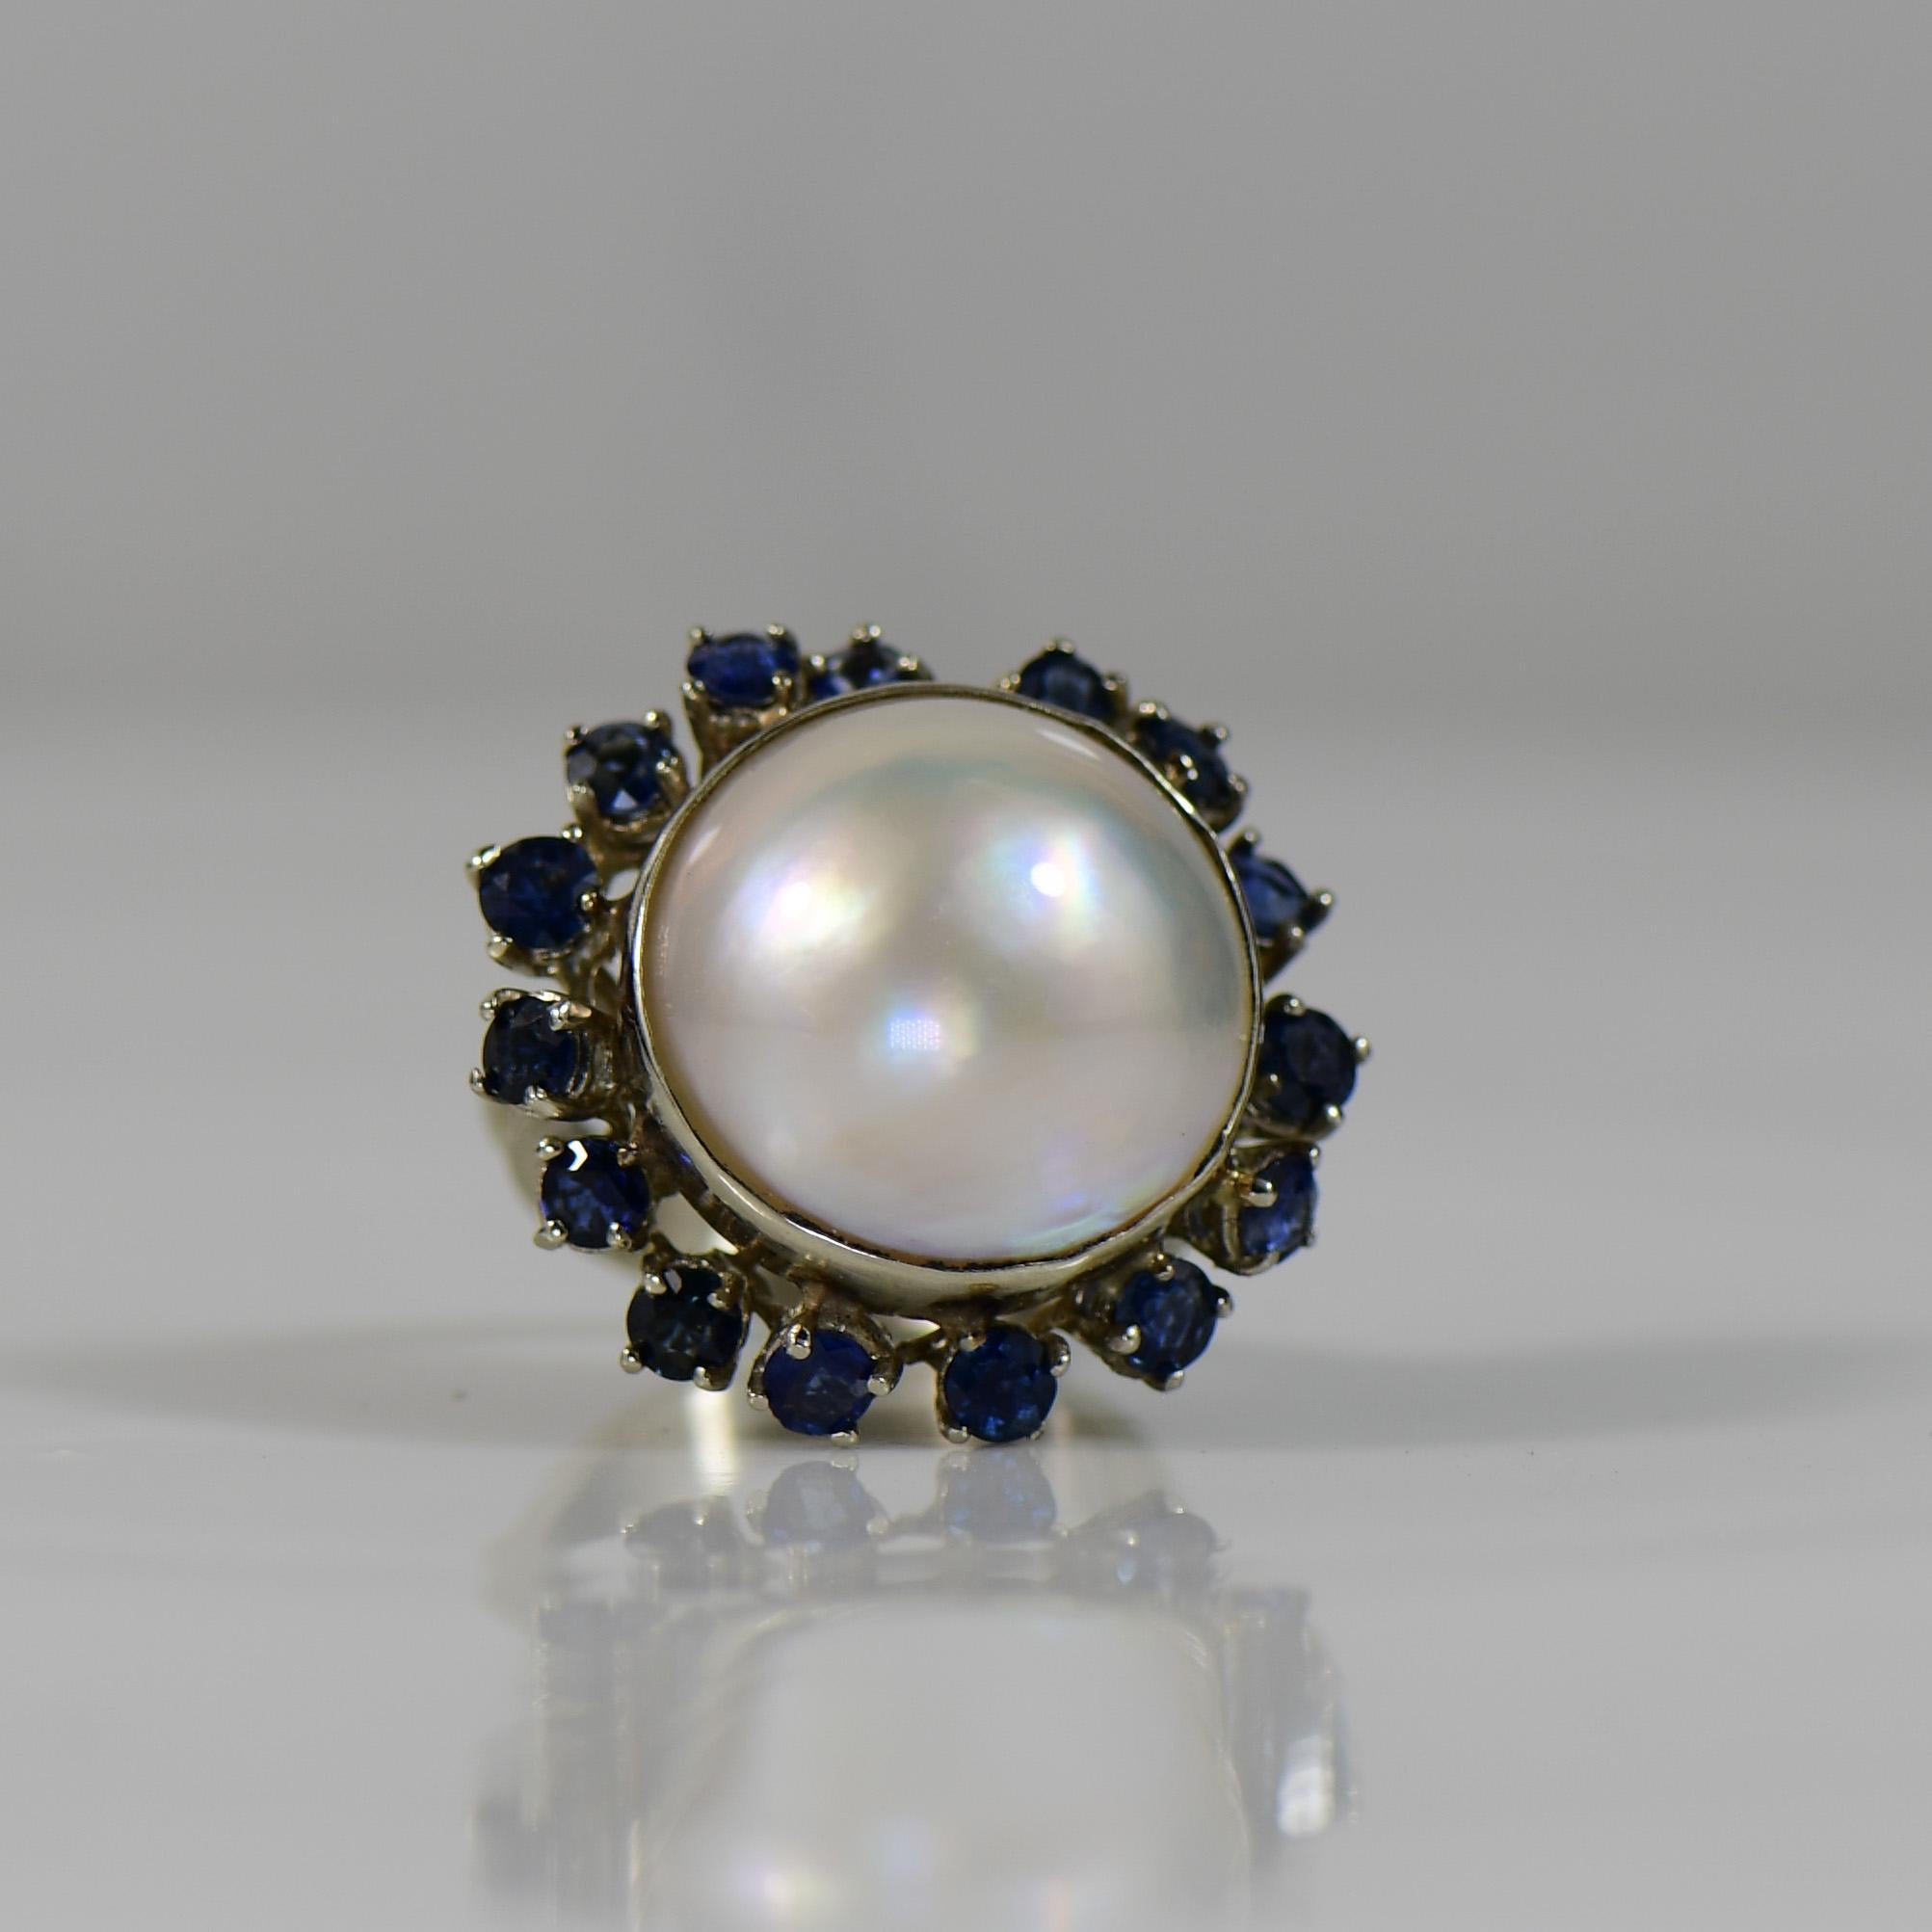 Elegance meets sophistication in this 14K white gold ring featuring a resplendent 18mm pearl as its centerpiece. The lustrous pearl is gracefully accented by a circle of 15 natural sapphires, creating a striking contrast against the pristine white